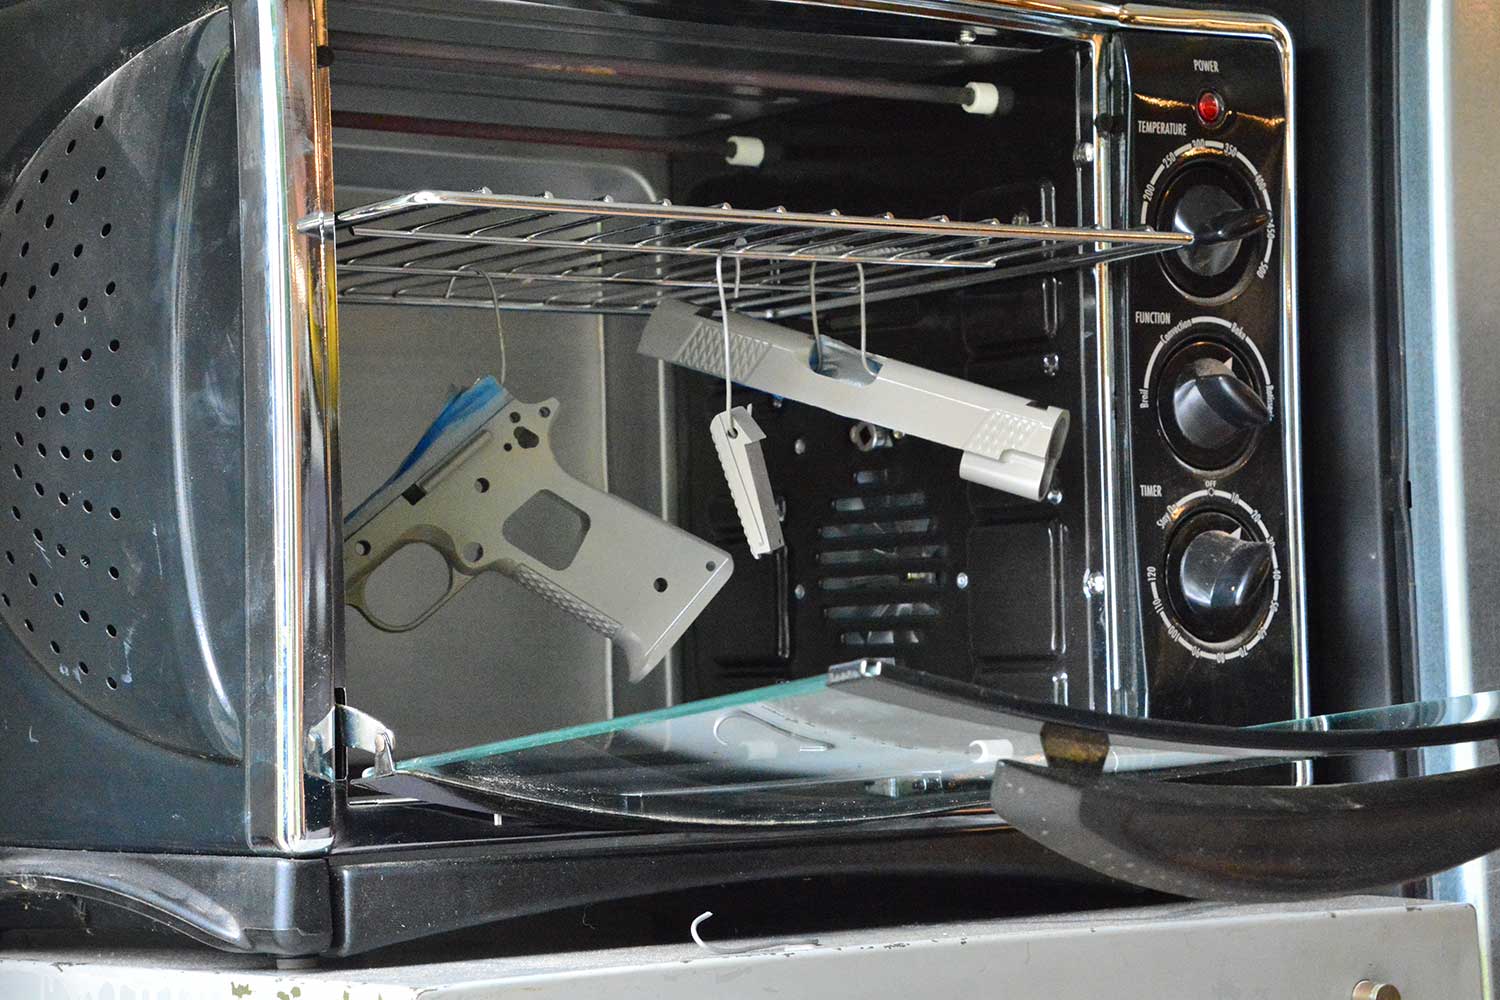 Gun parts  drying in a convection oven.